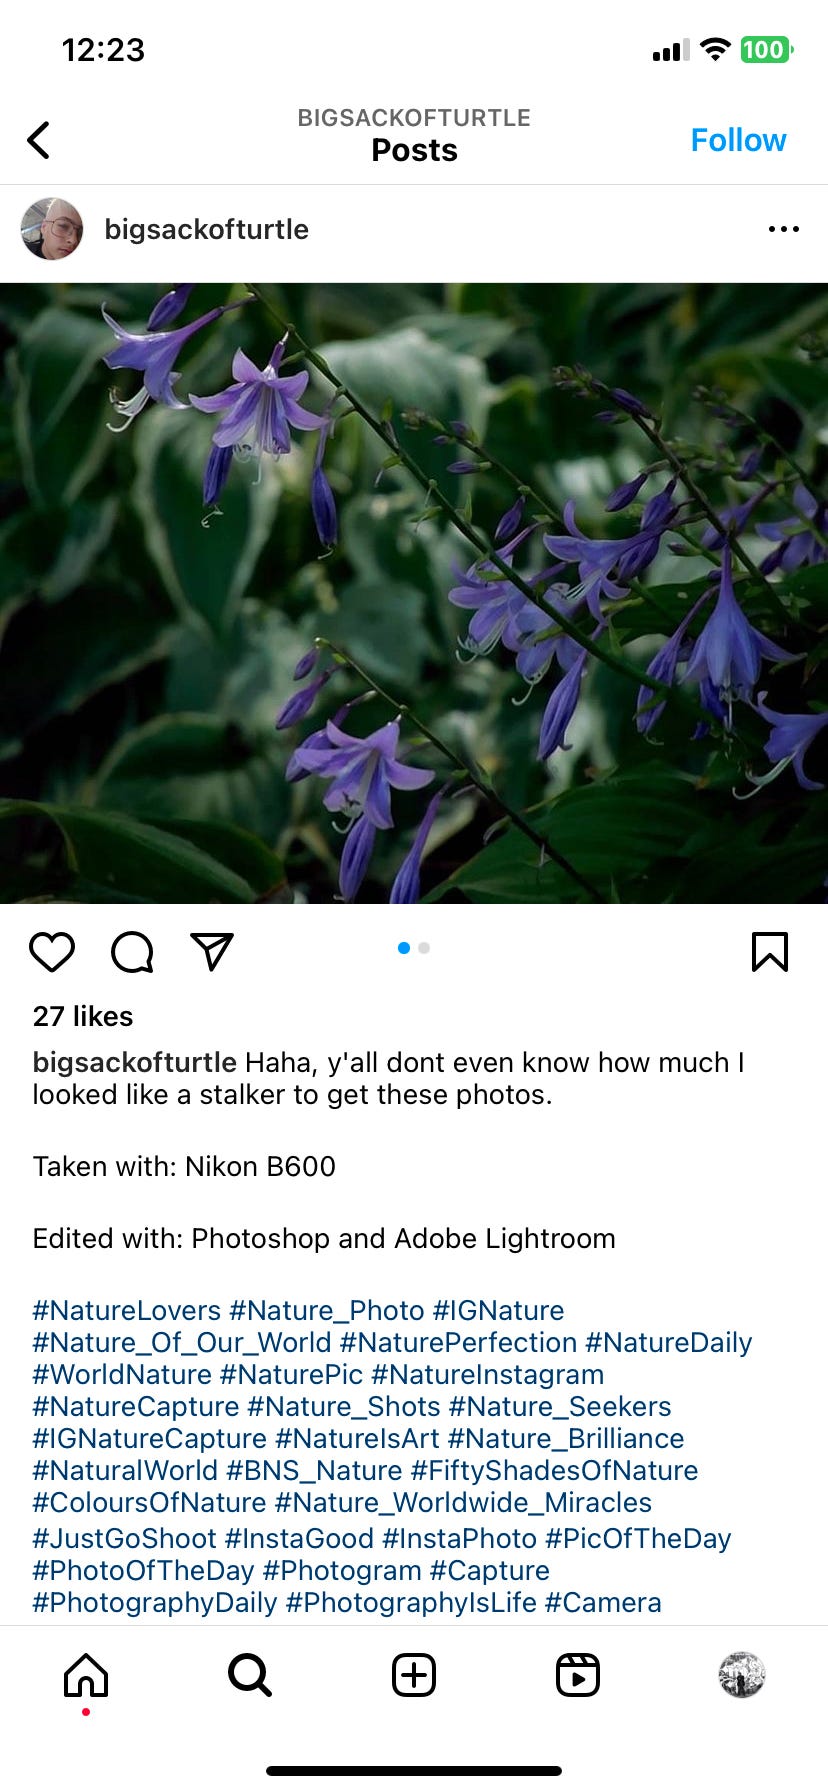 Screenshots show photos shared on David Kleeba's instagram page. He enjoyed photographing plants, architecture and his friends.